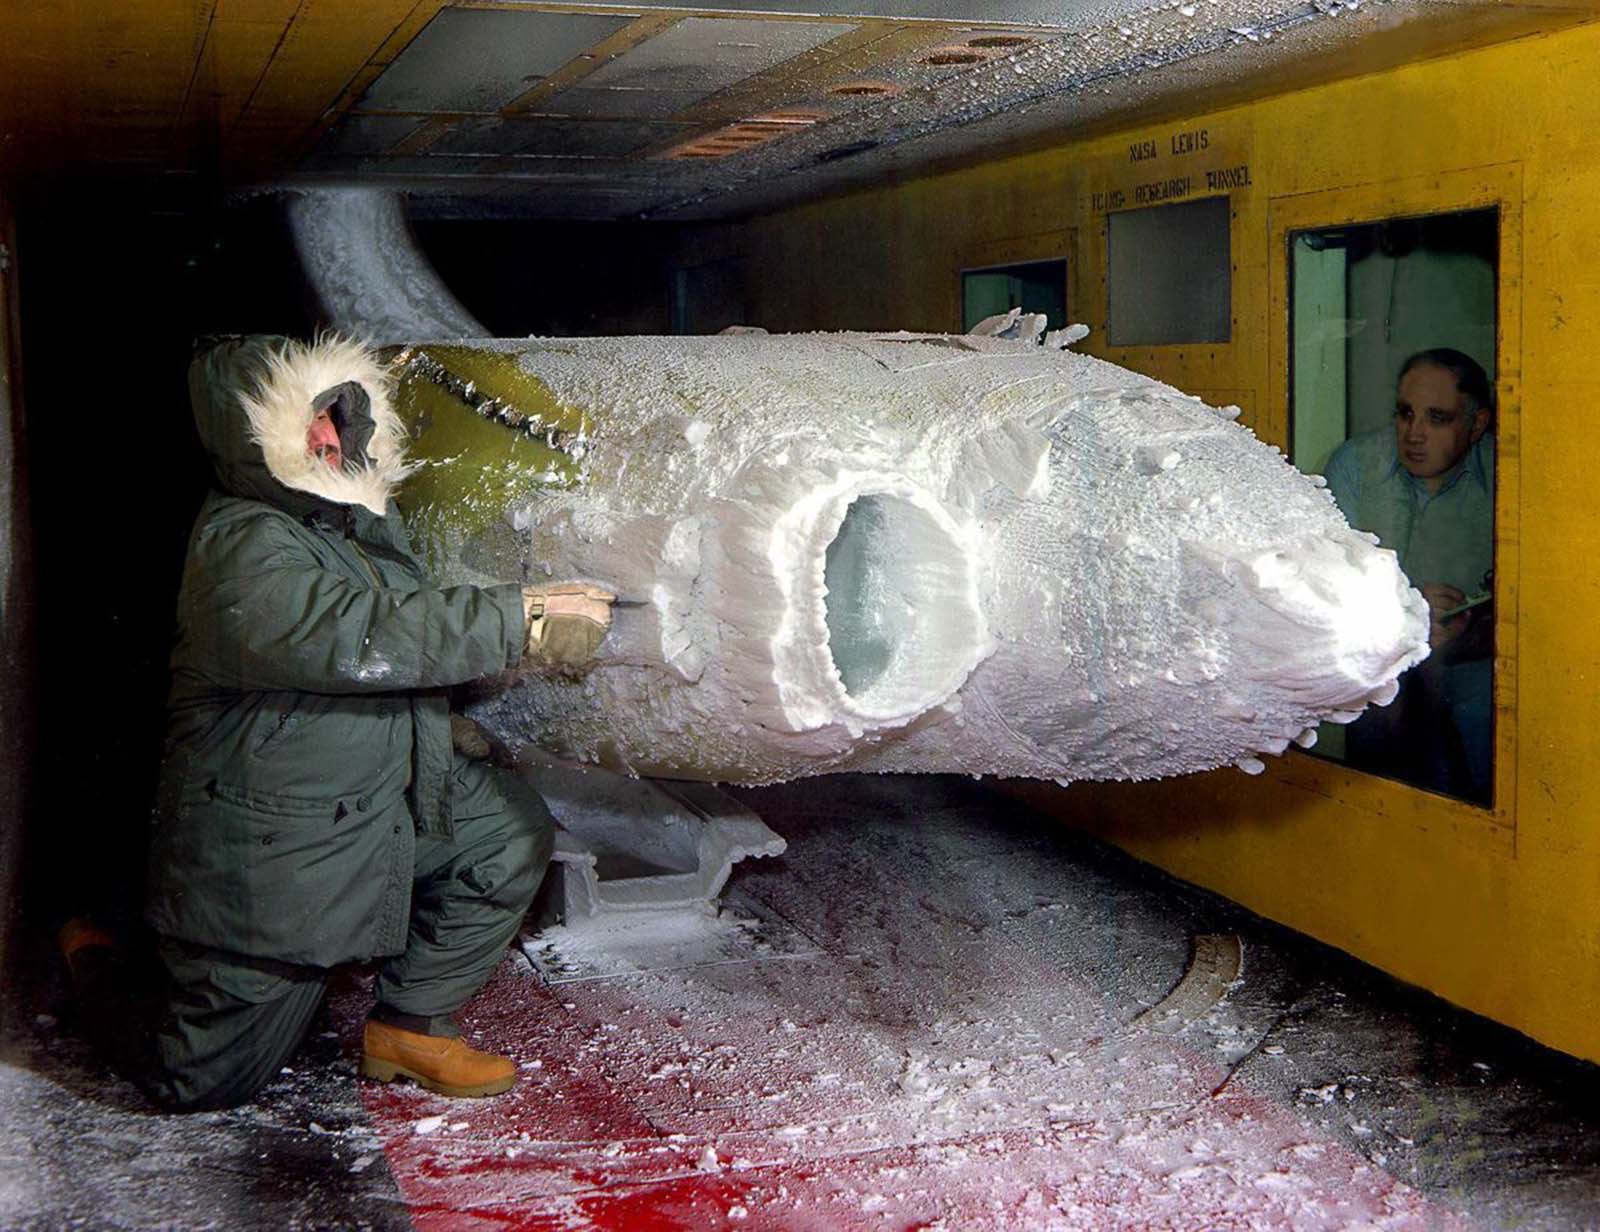 A researcher examines the ice build-up on a turboprop engine nacelle in the Icing Research Tunnel, 1983.